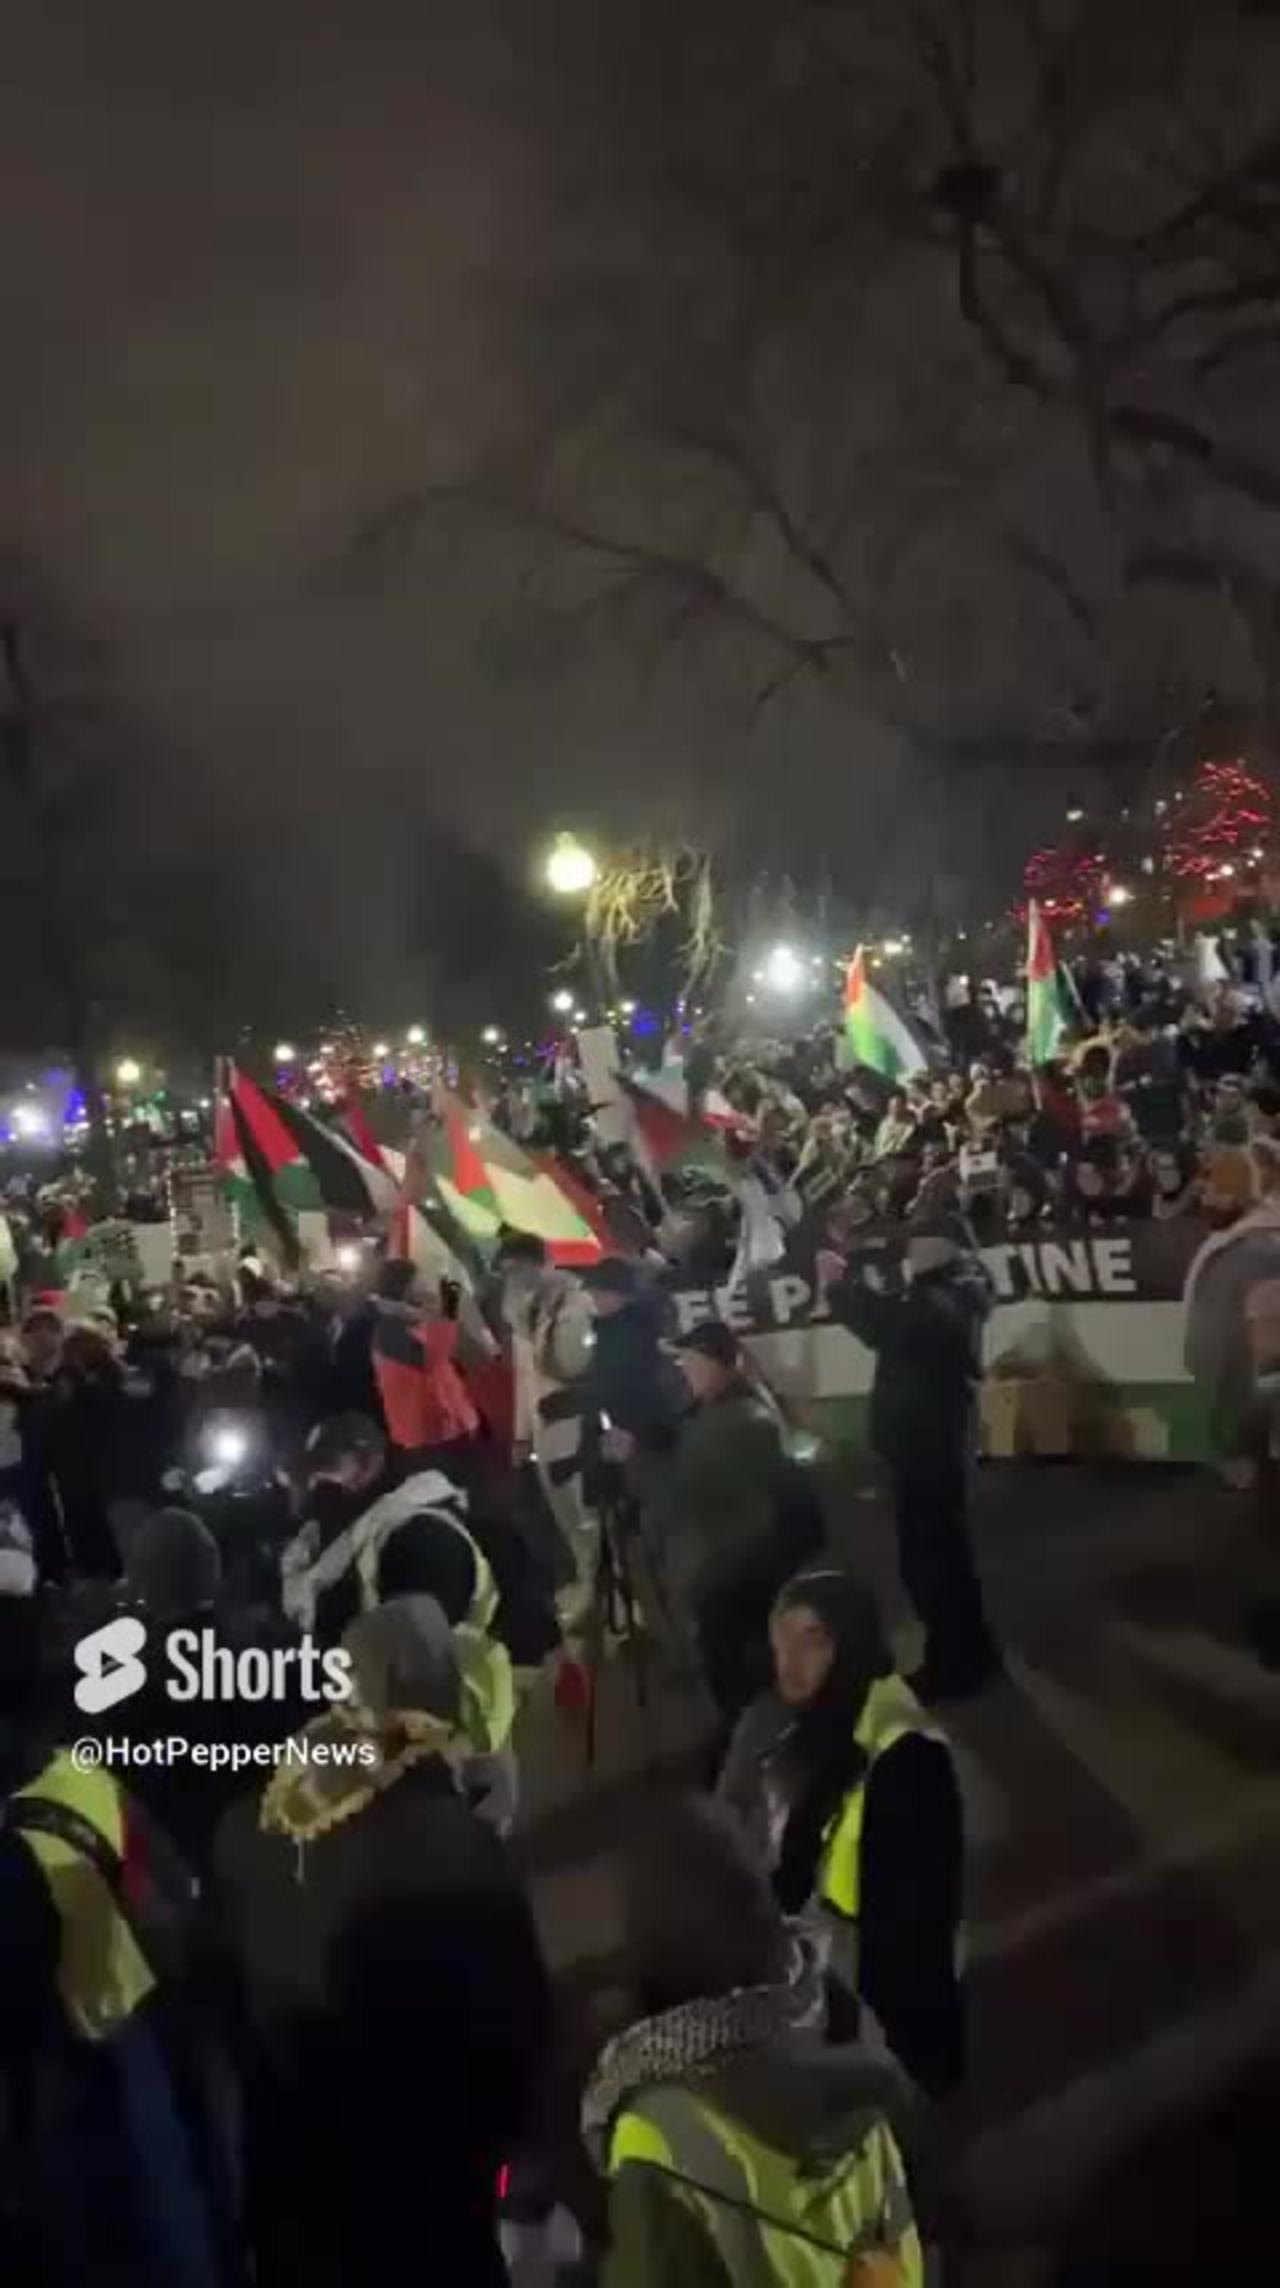 BREAKING: Anti-Israel protesters have crashed the public New Year’s Eve celebration at Boston Common